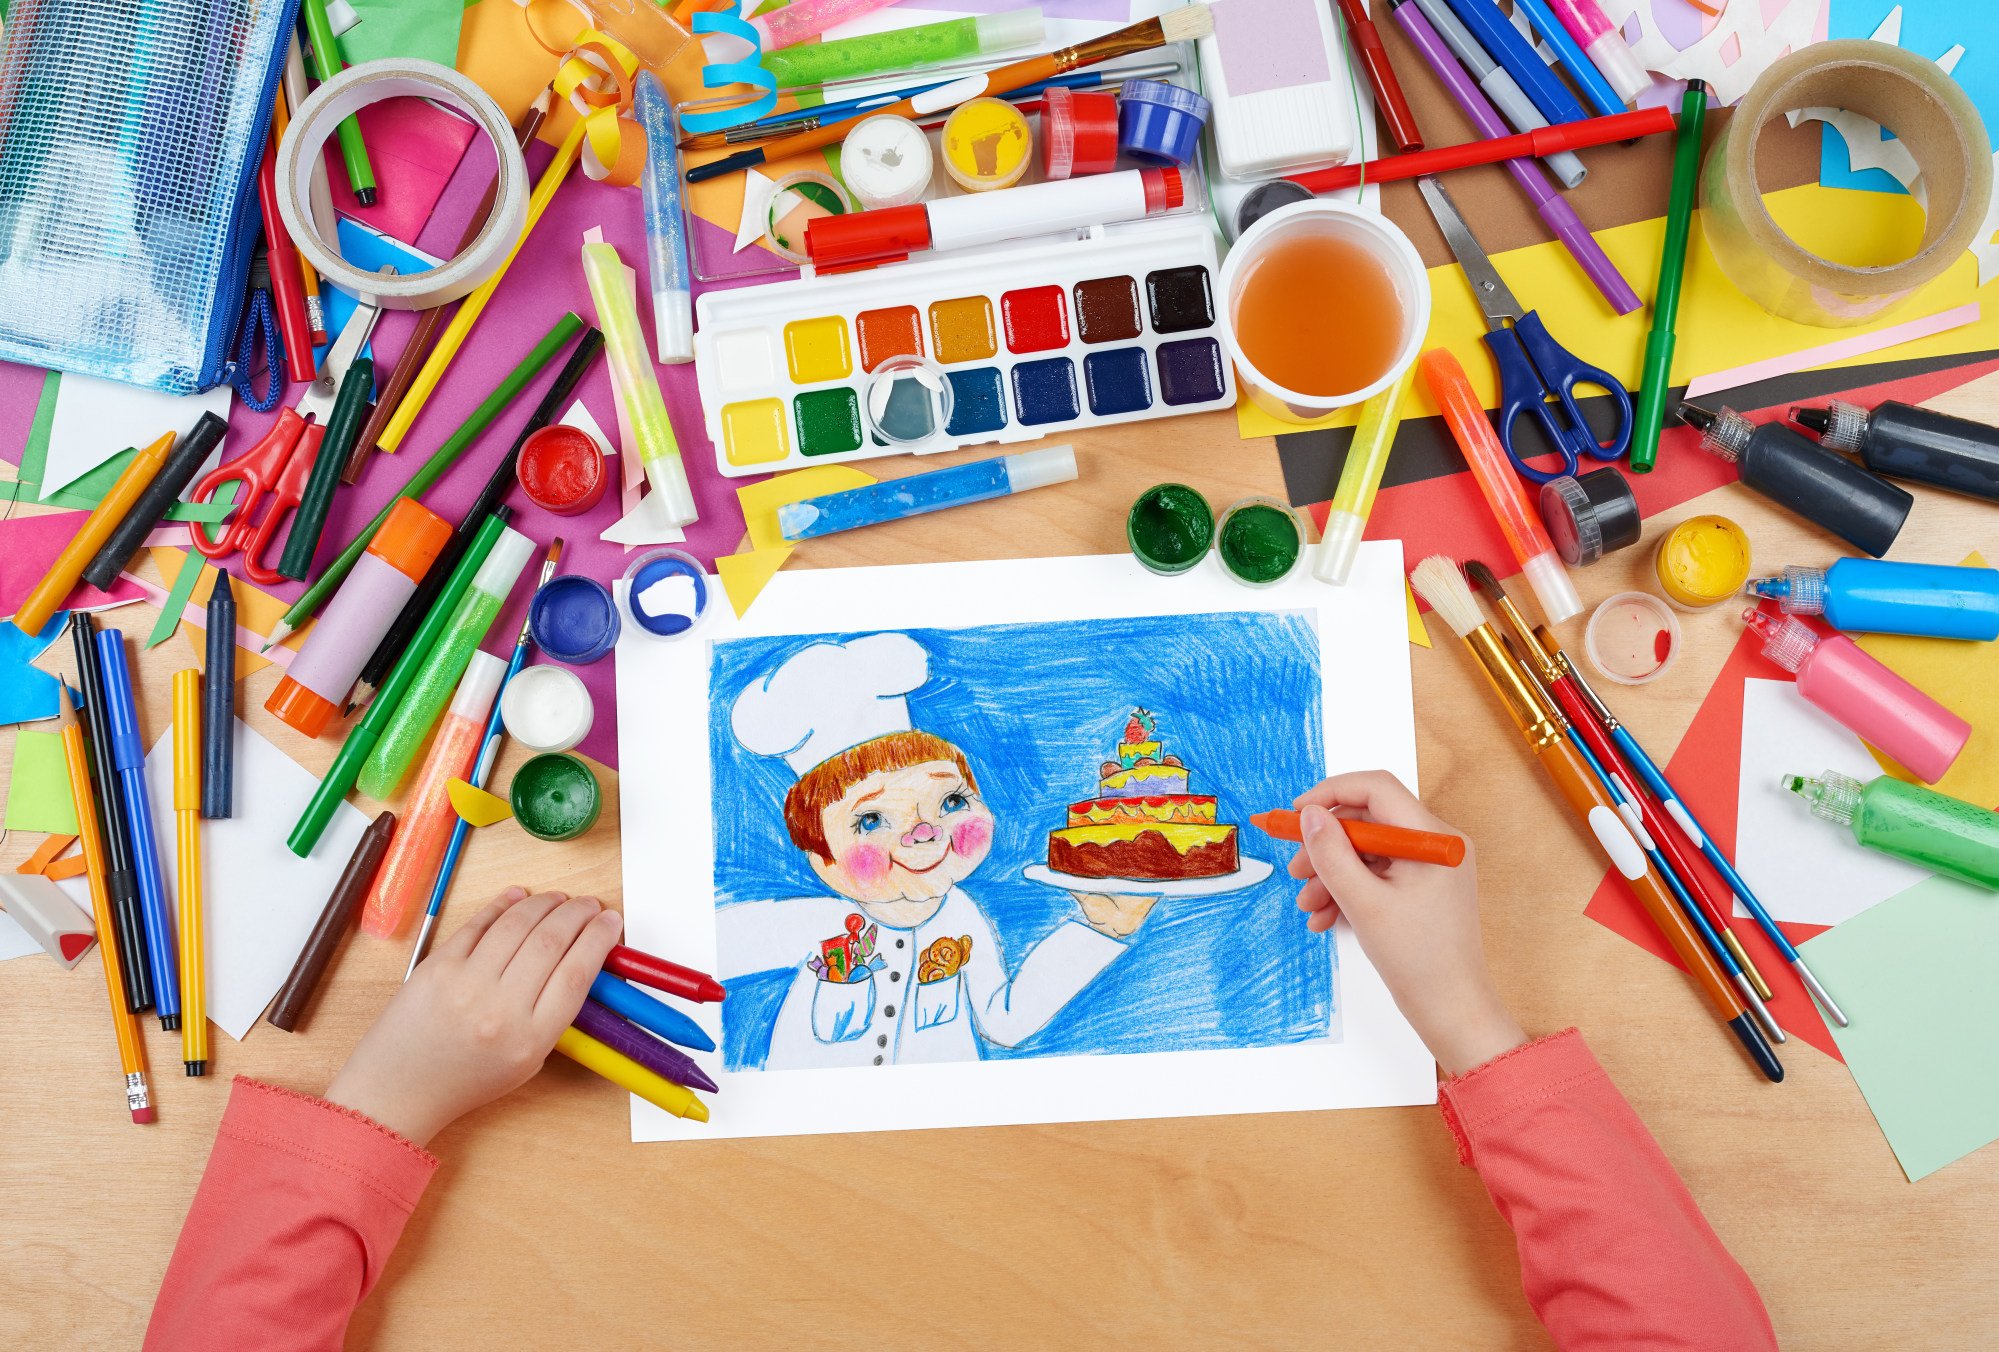 Art Materials for Artists with Disabilities - The Awesome Foundation